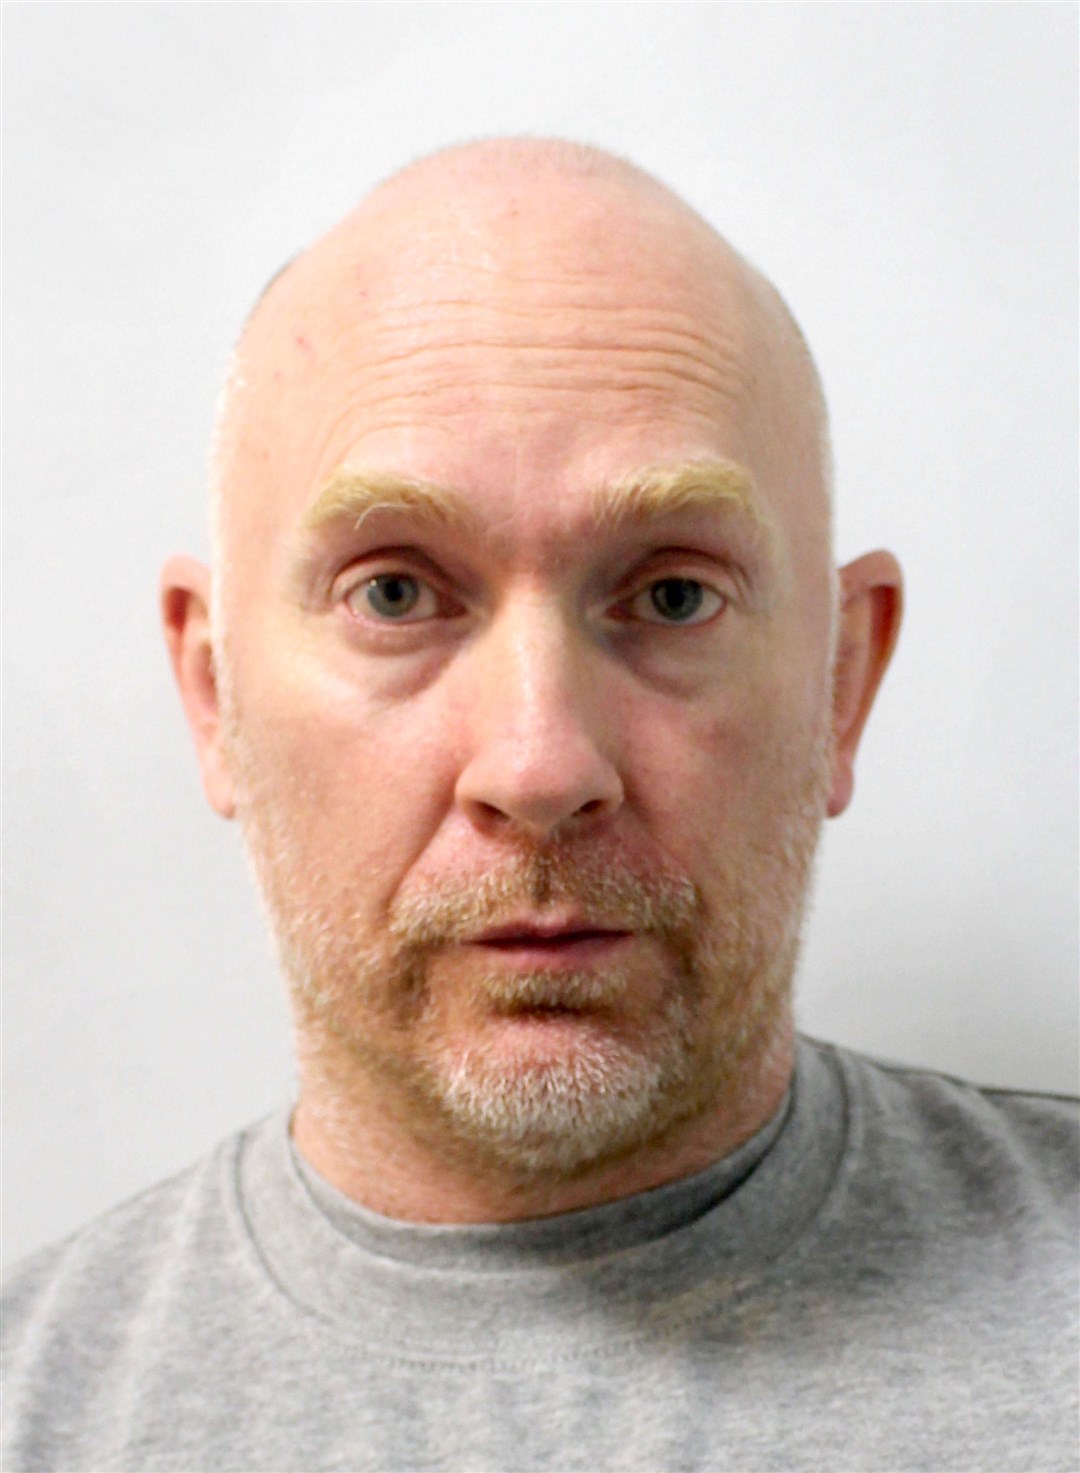 Wayne Couzens is serving a whole-life sentence for the murder of Sarah Everard (Metropolitan Police/PA)